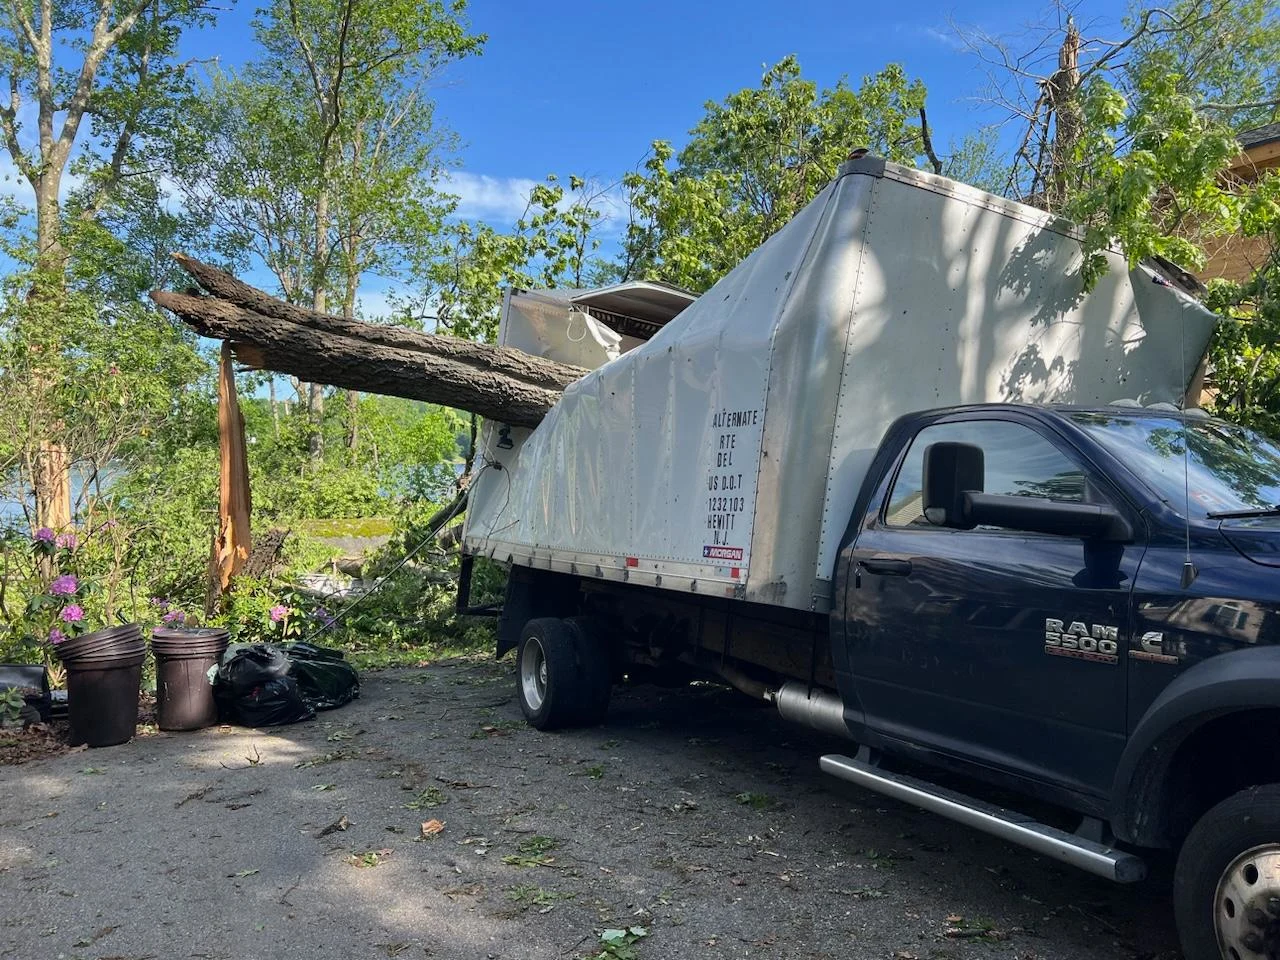 Cleanup underway following powerful storms that ripped through New Jersey